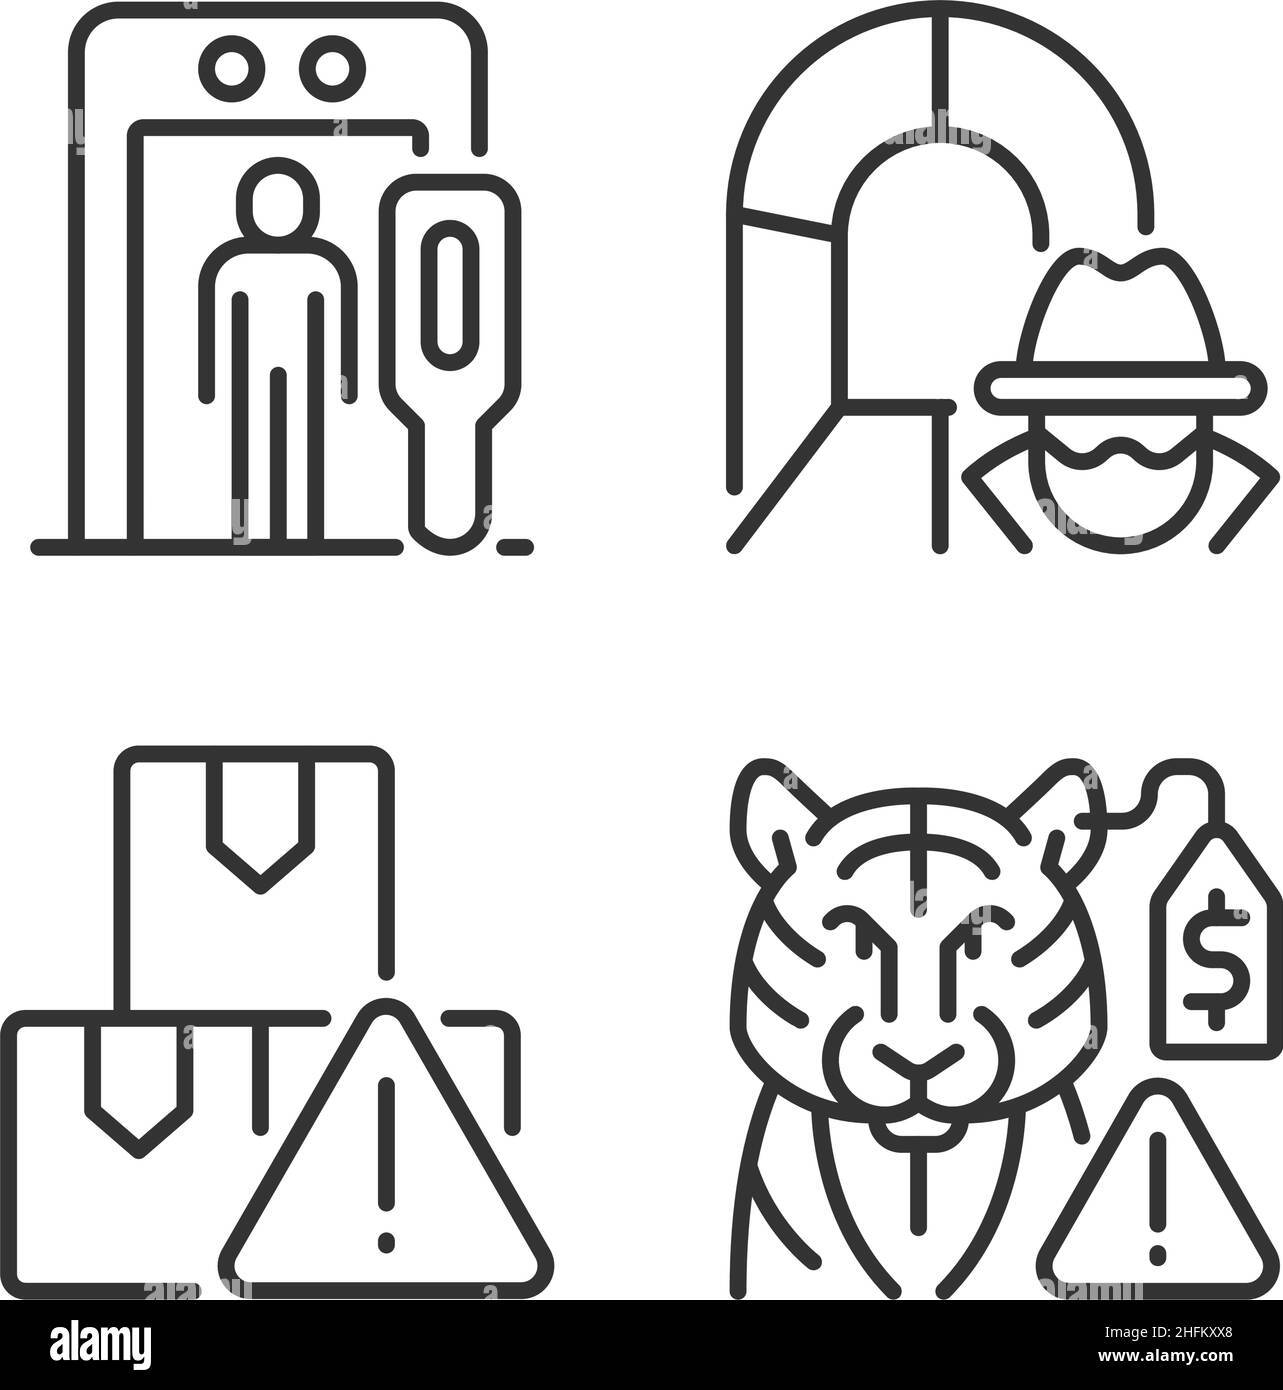 Smugglers activities prevention linear icons set Stock Vector